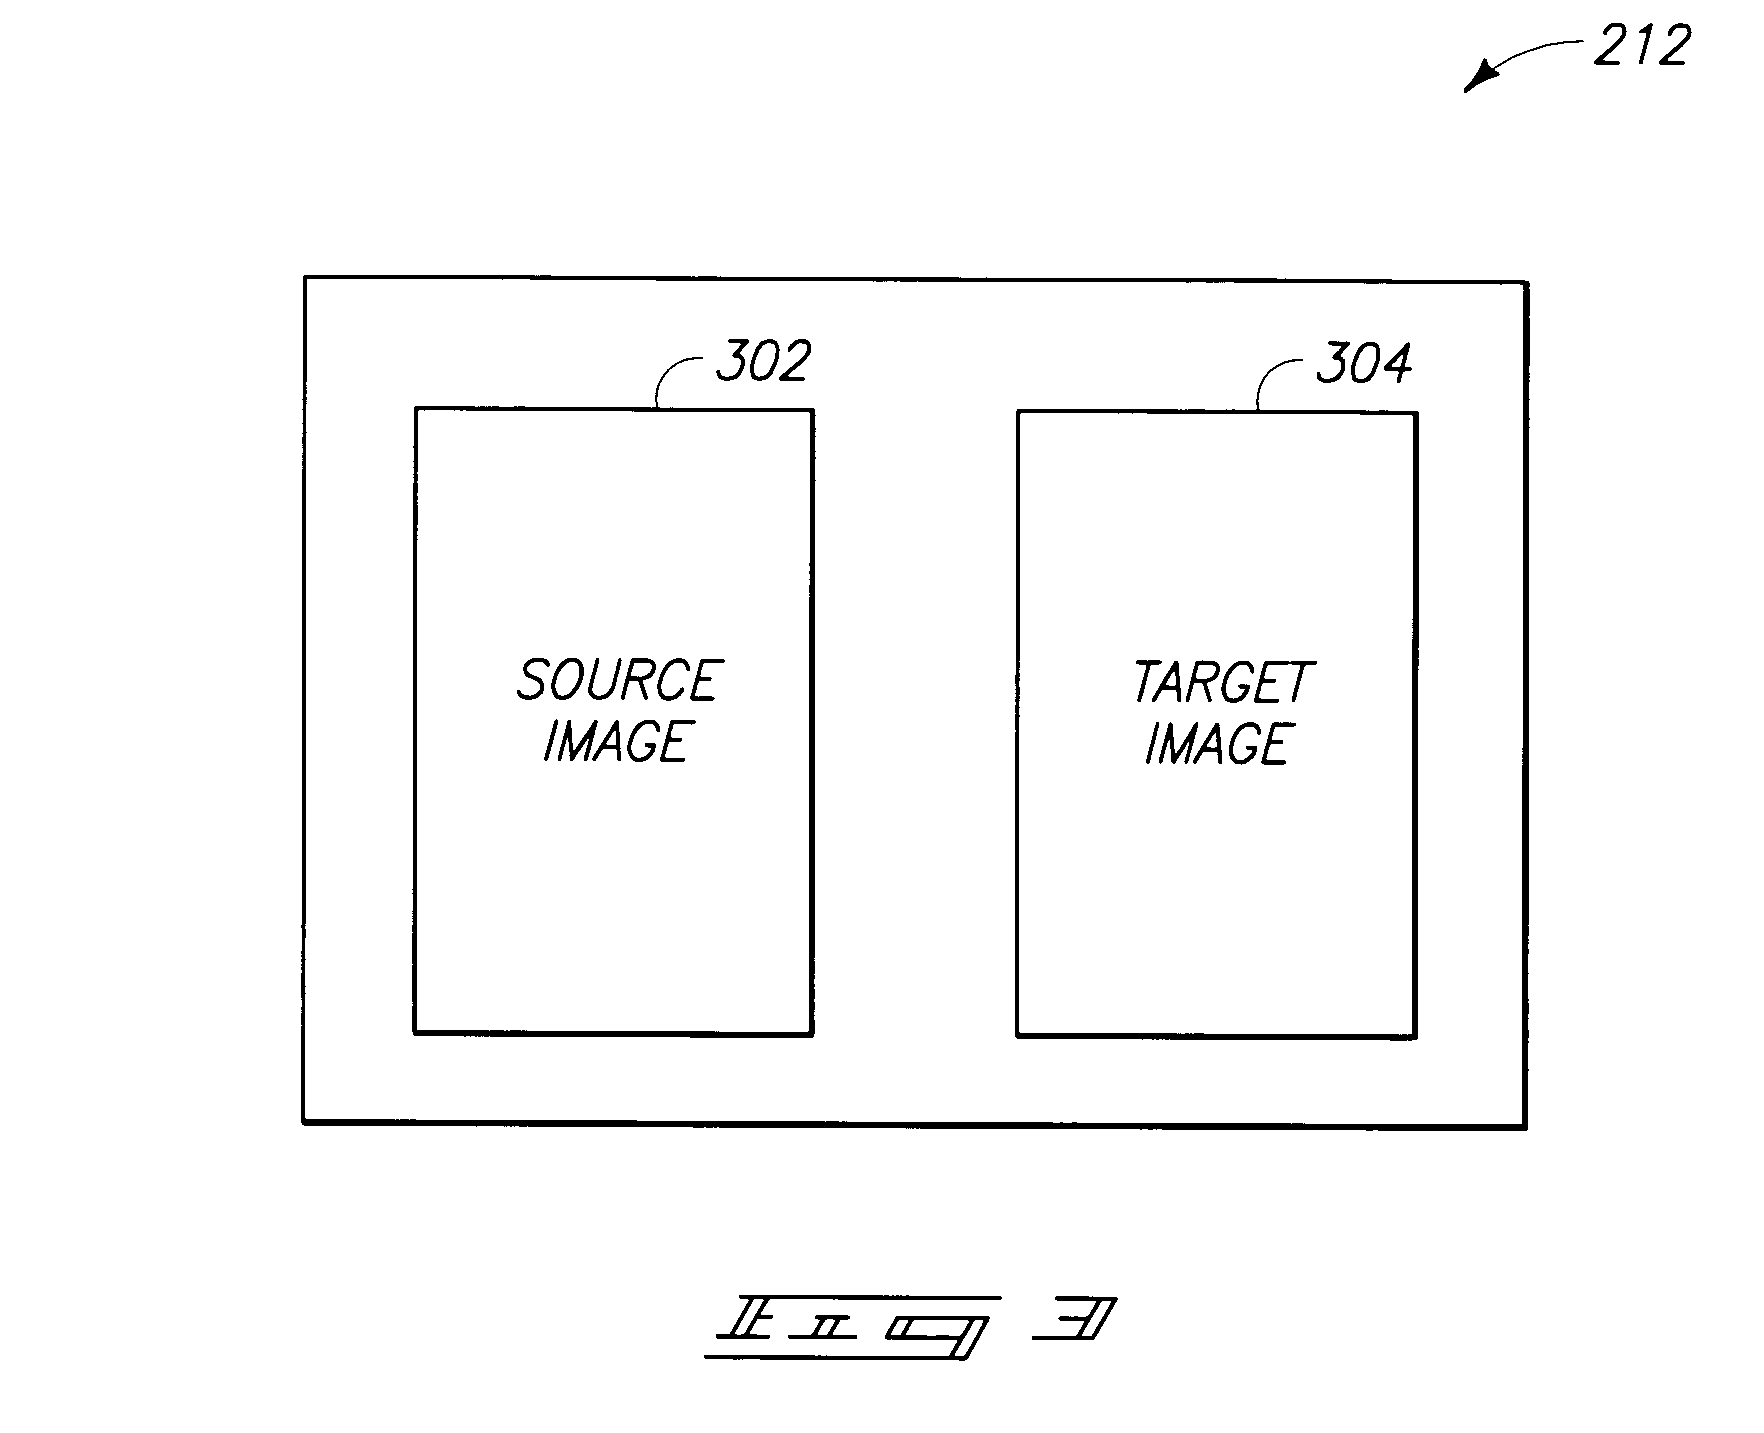 Image change detection systems, methods, and articles of manufacture